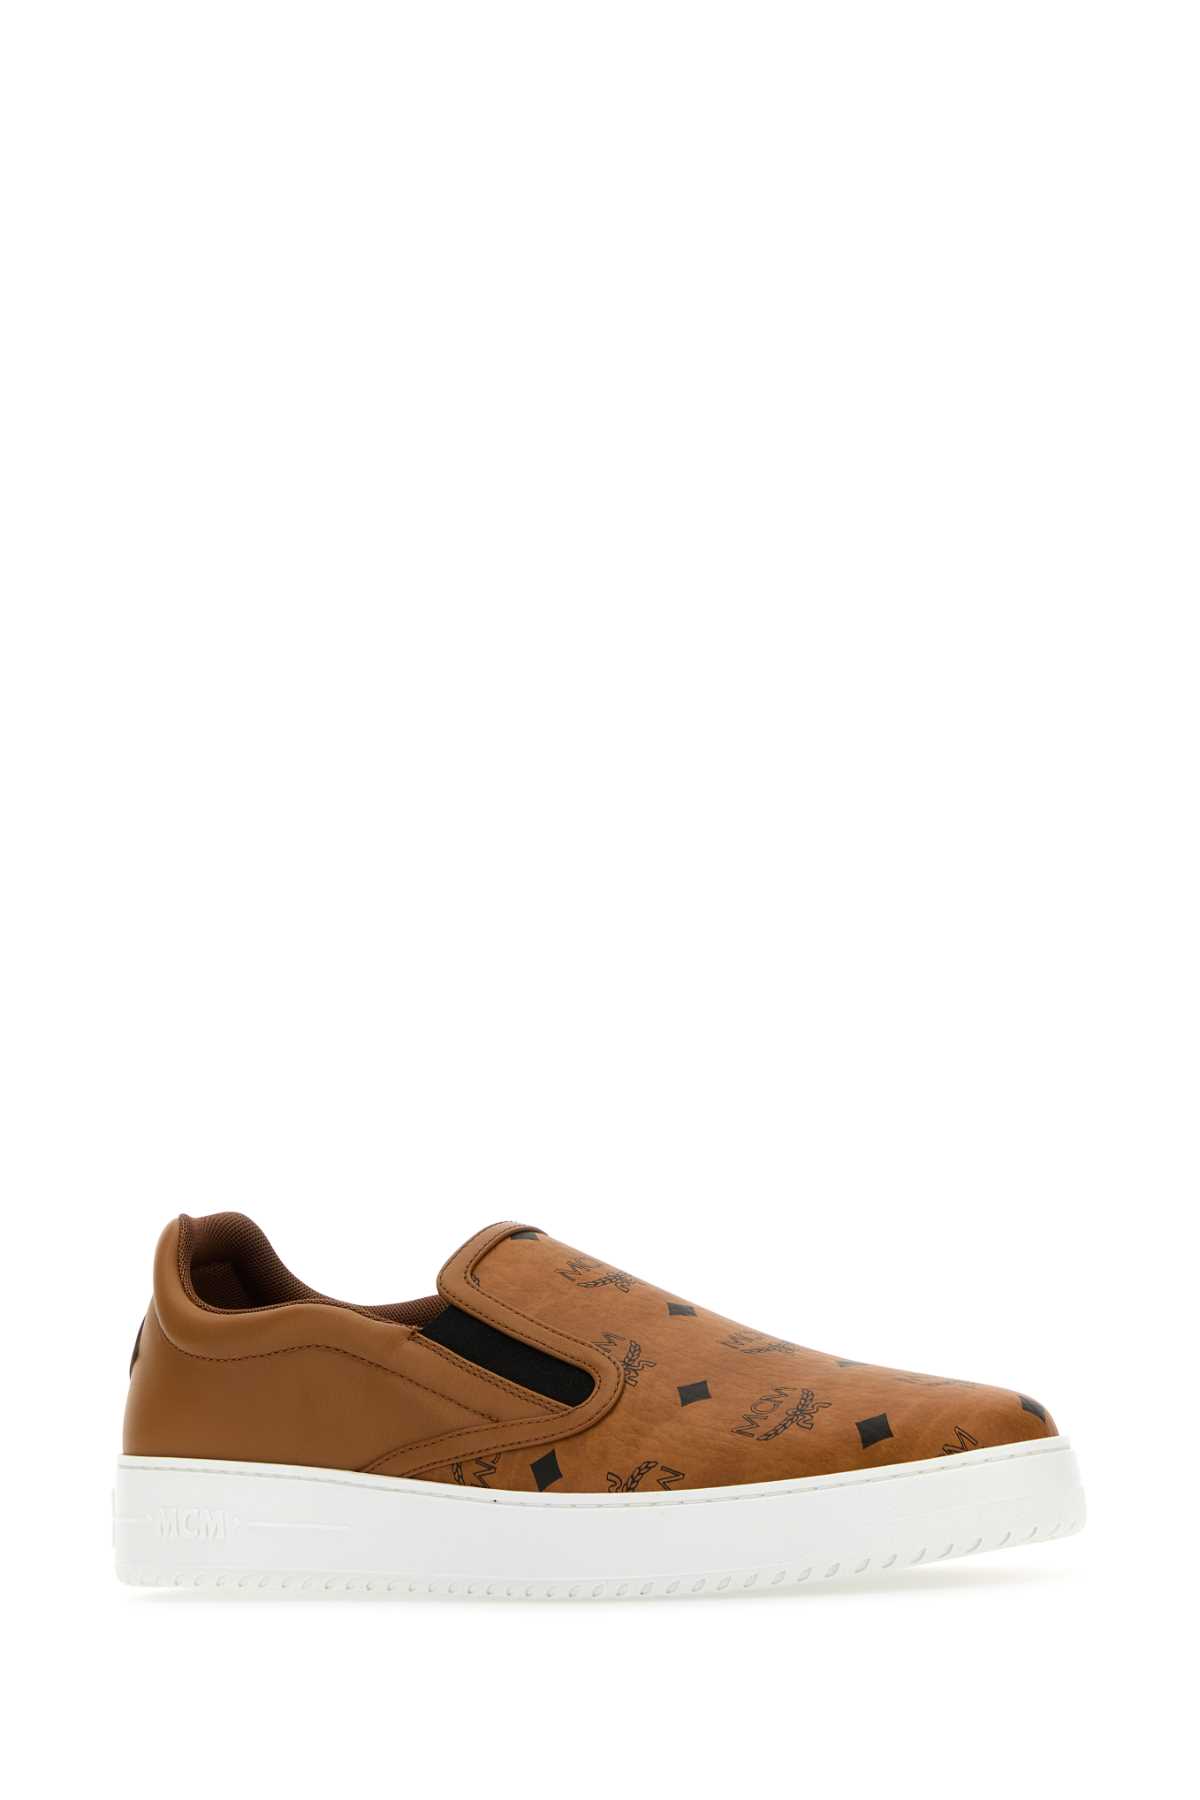 Mcm Caramel Canvas And Leather Terrain Slip Ons In Cognac